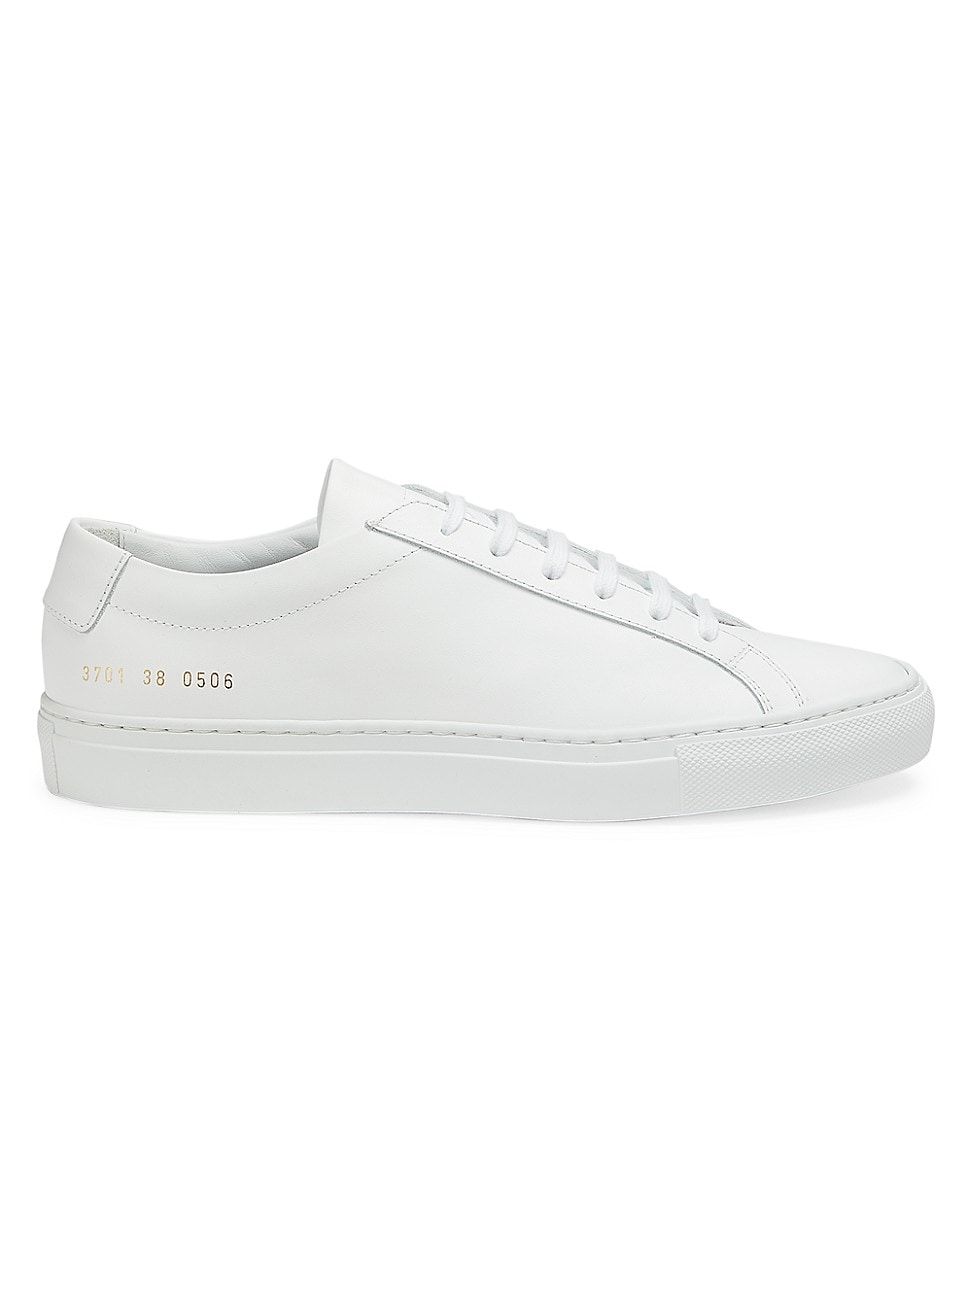 Women's Original Achilles Leather Low-Top Sneakers - White - Size 10 | Saks Fifth Avenue